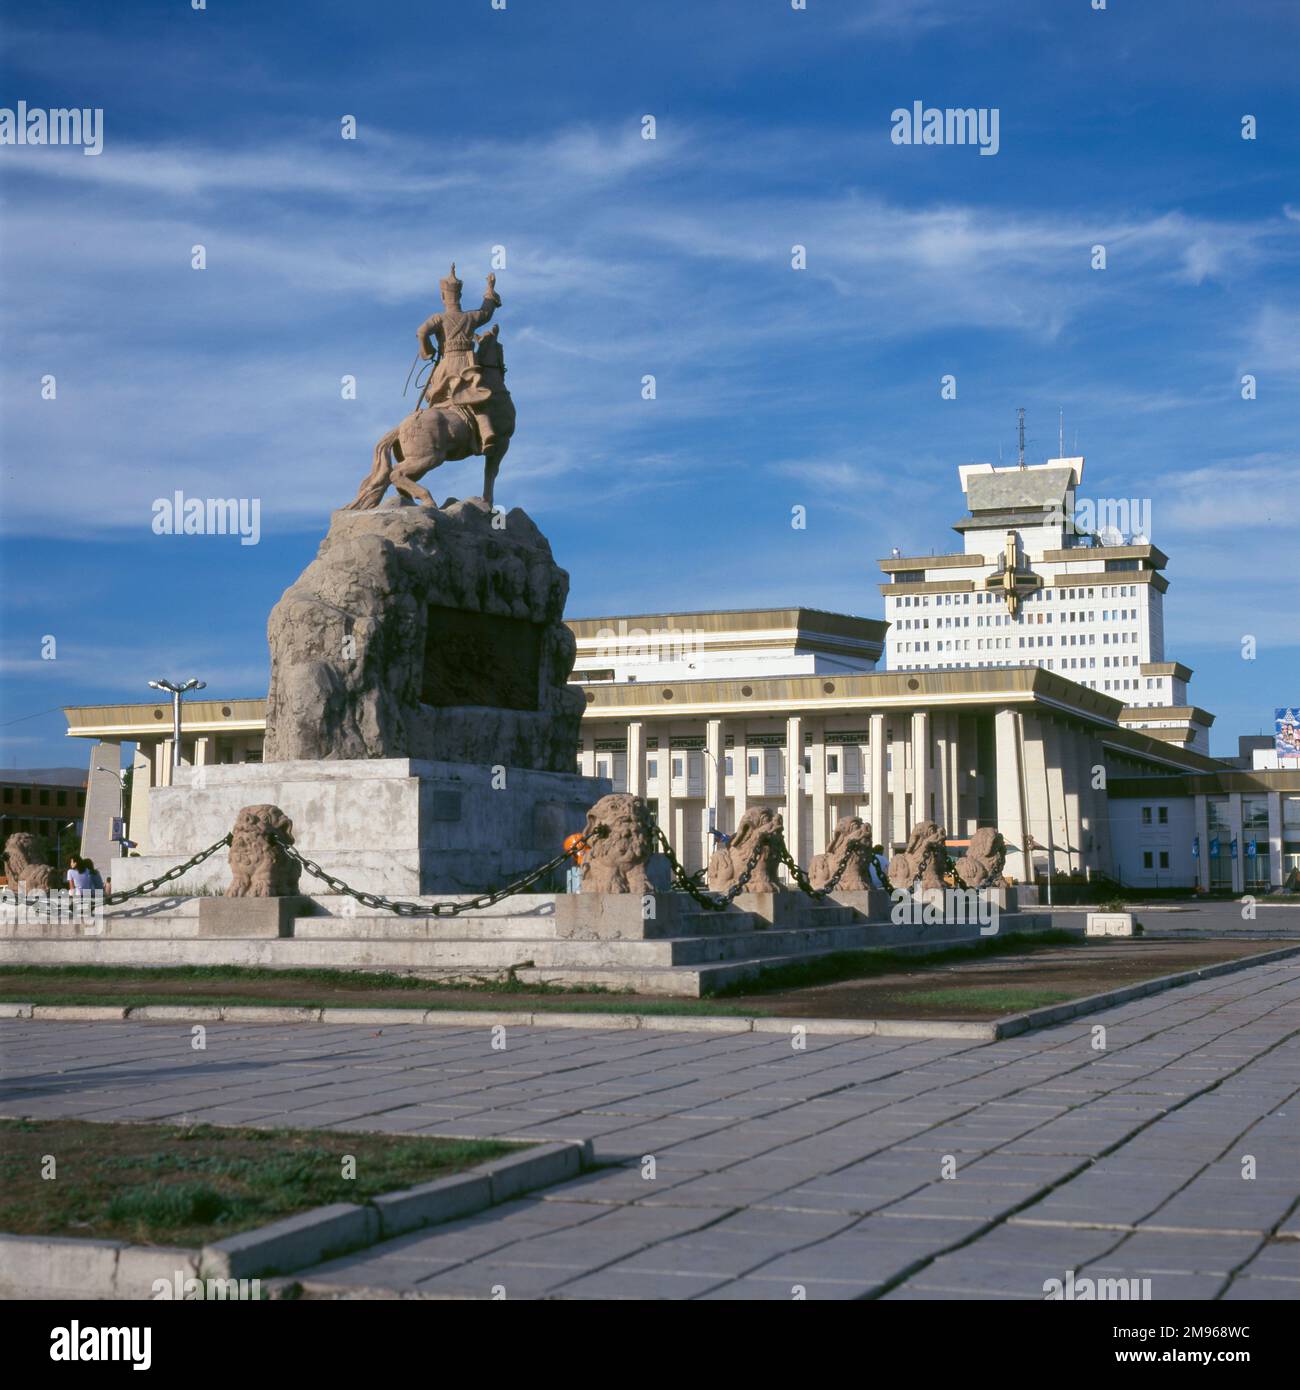 View of the Memorial of Suke Baatar (Mongolia's national hero in the struggle for independence, Damdin Sukhbaatar, 1893-1923) in Sukhbaatar Square, with the Cultural Centre in the background, at Ulaanbaatar (or Ulan Bator), capital of Mongolia. Stock Photo